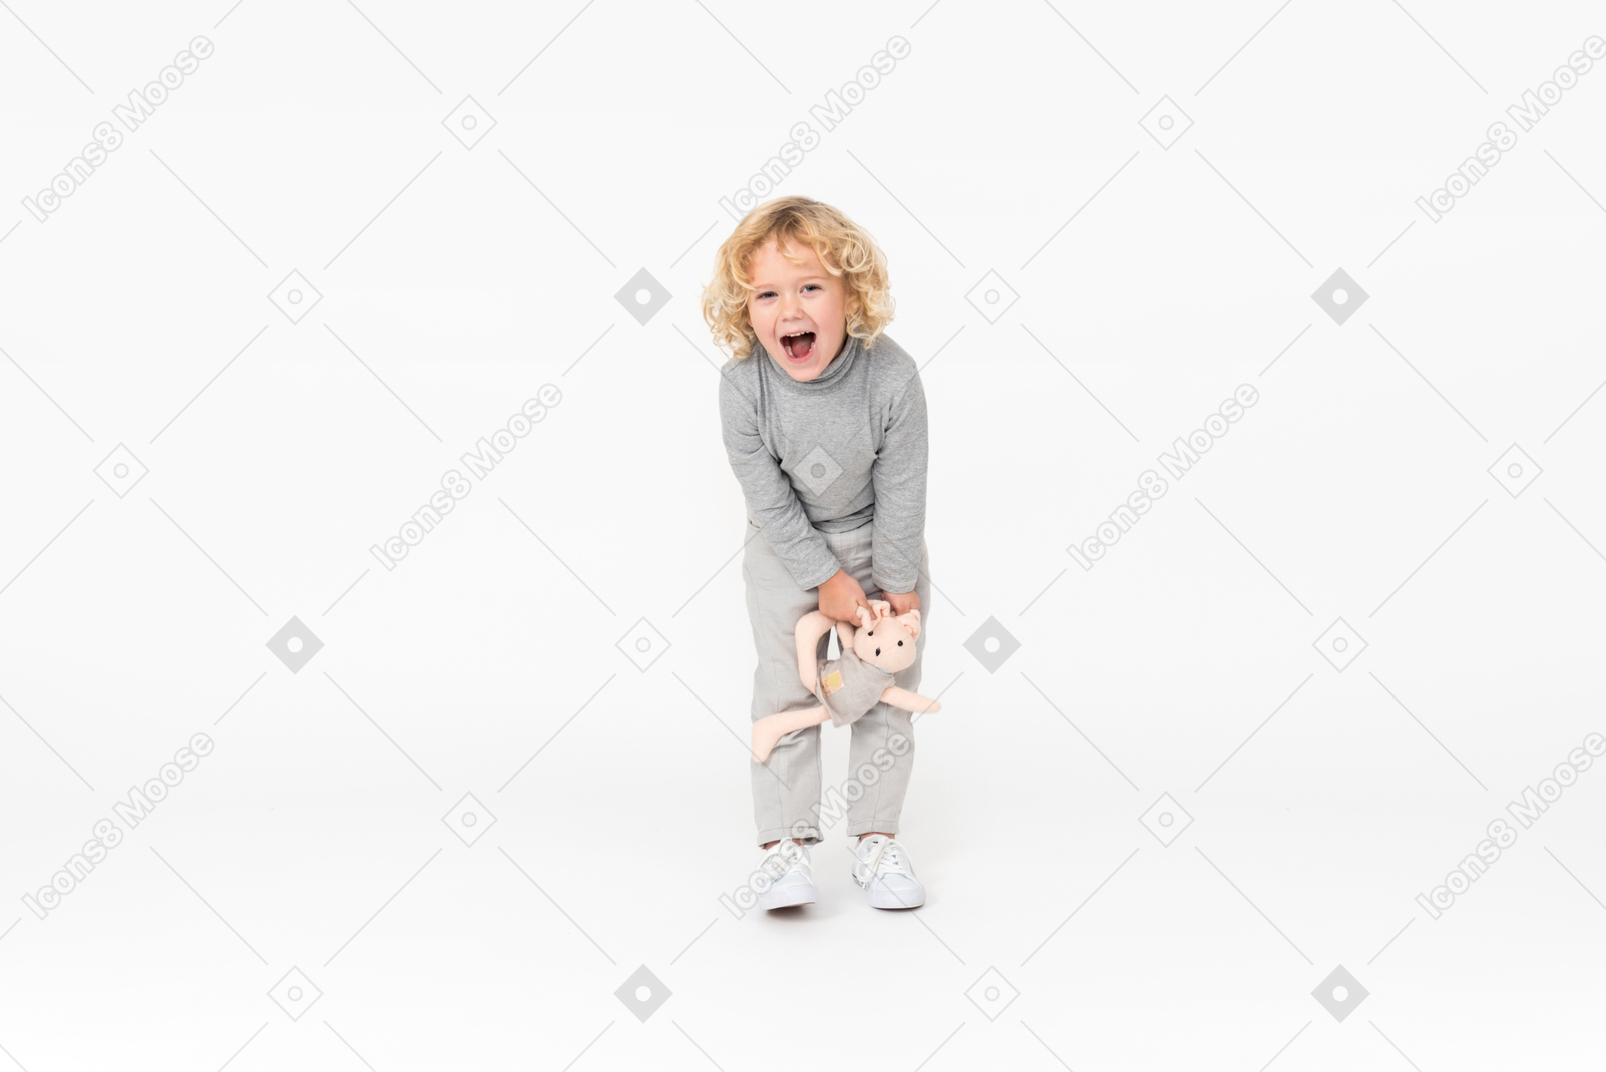 Laughing kid boy holding toy